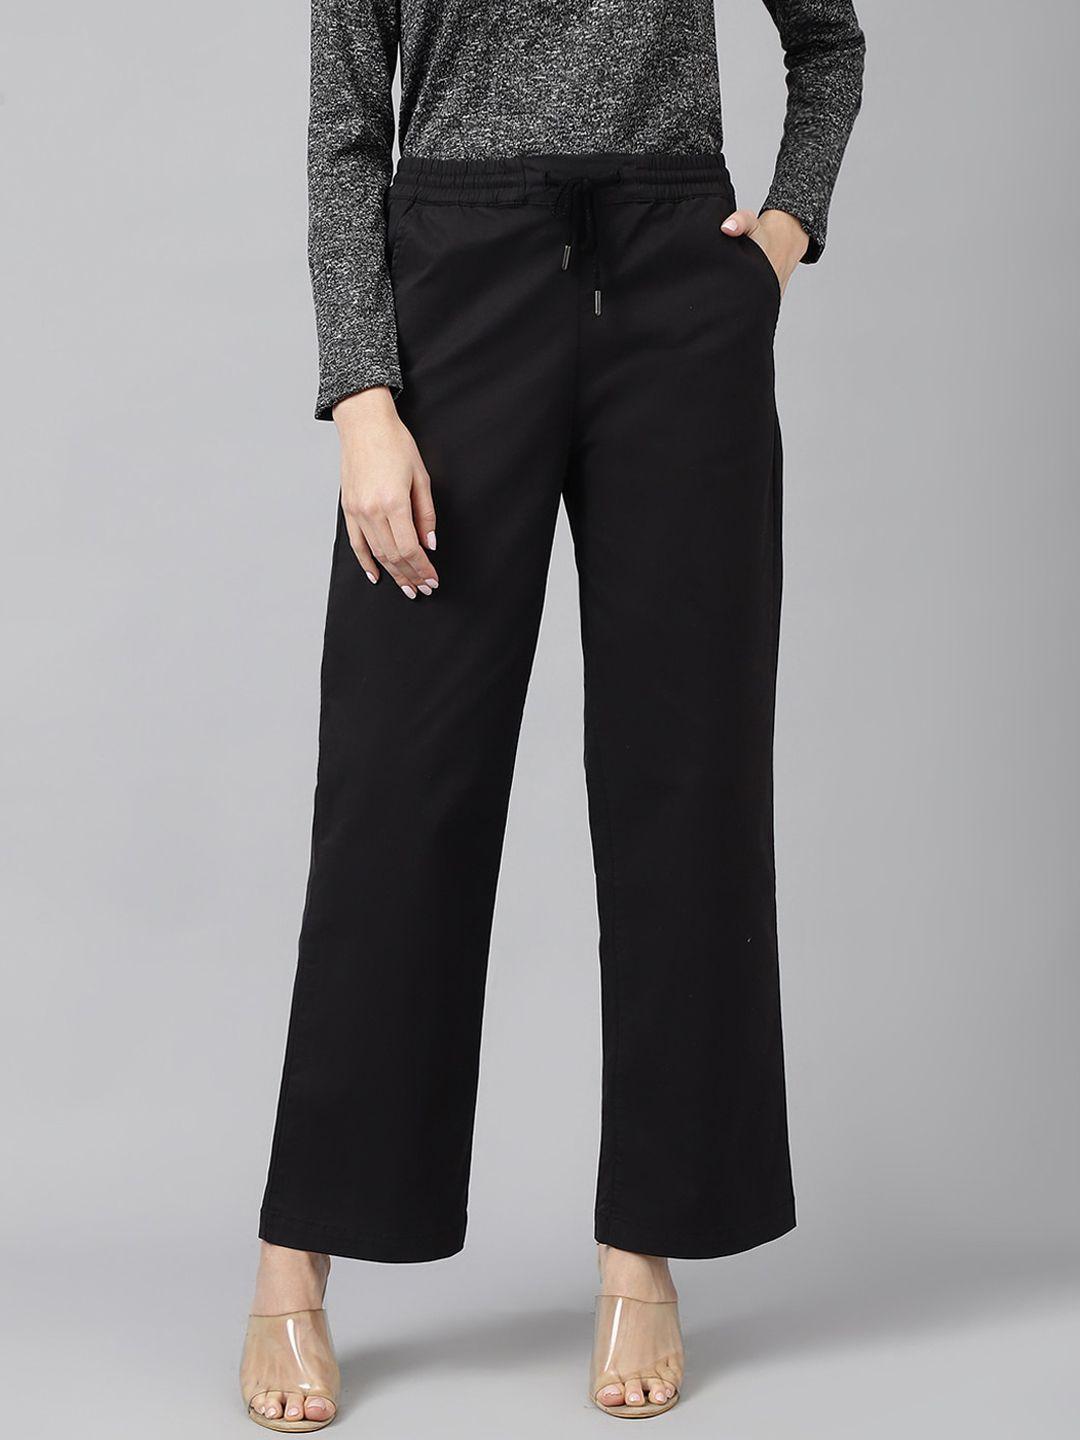 xpose-women-comfort-straight-fit-high-rise-trousers